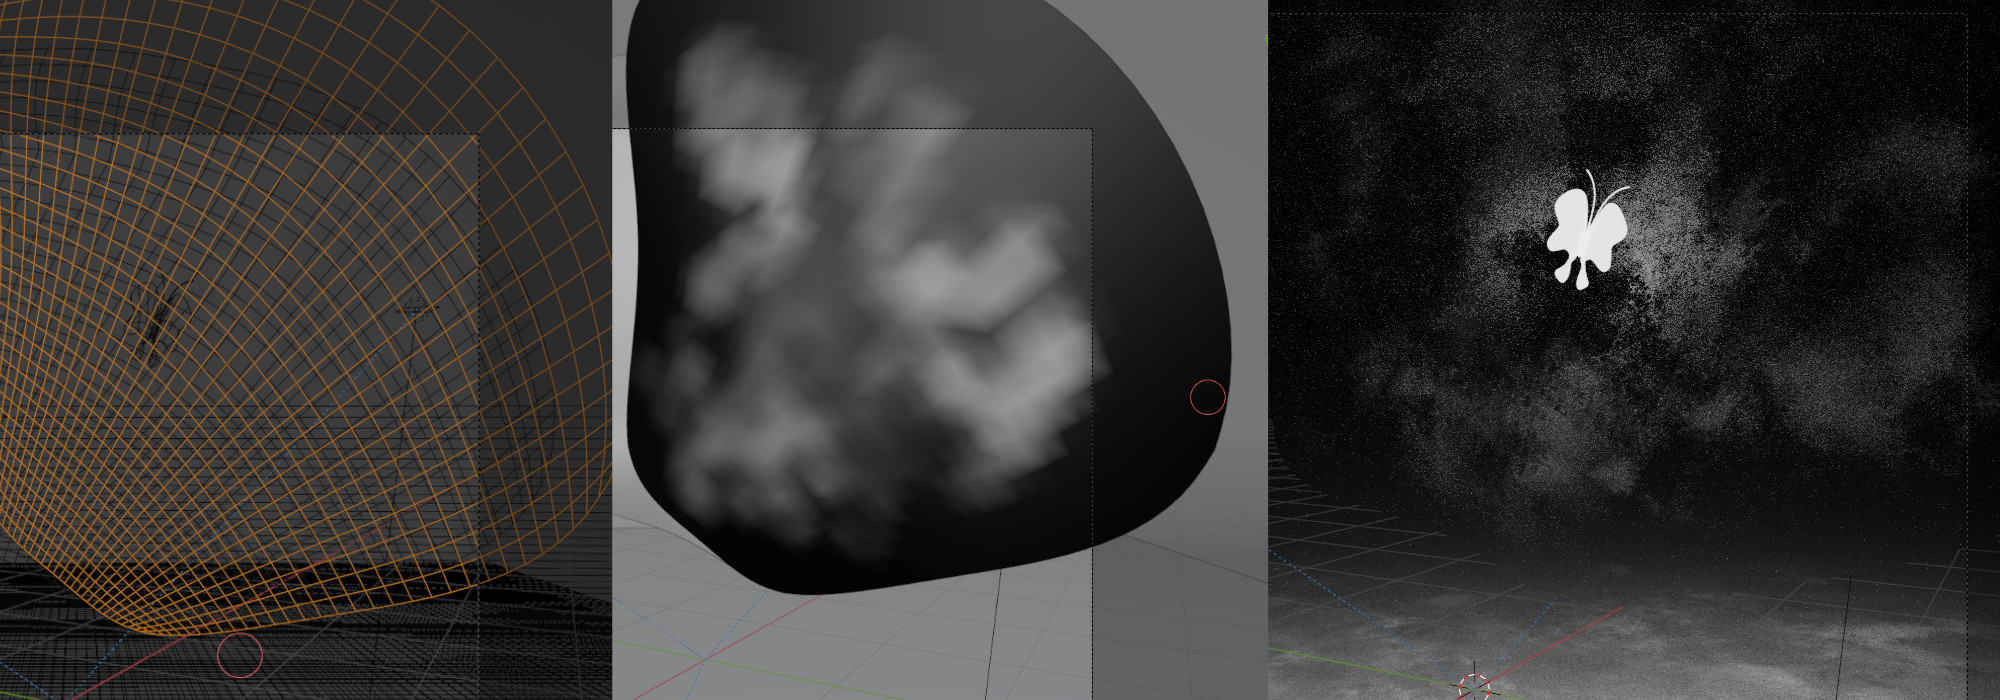 Fog material uses vertex color to mix principled shader and transparent shader.